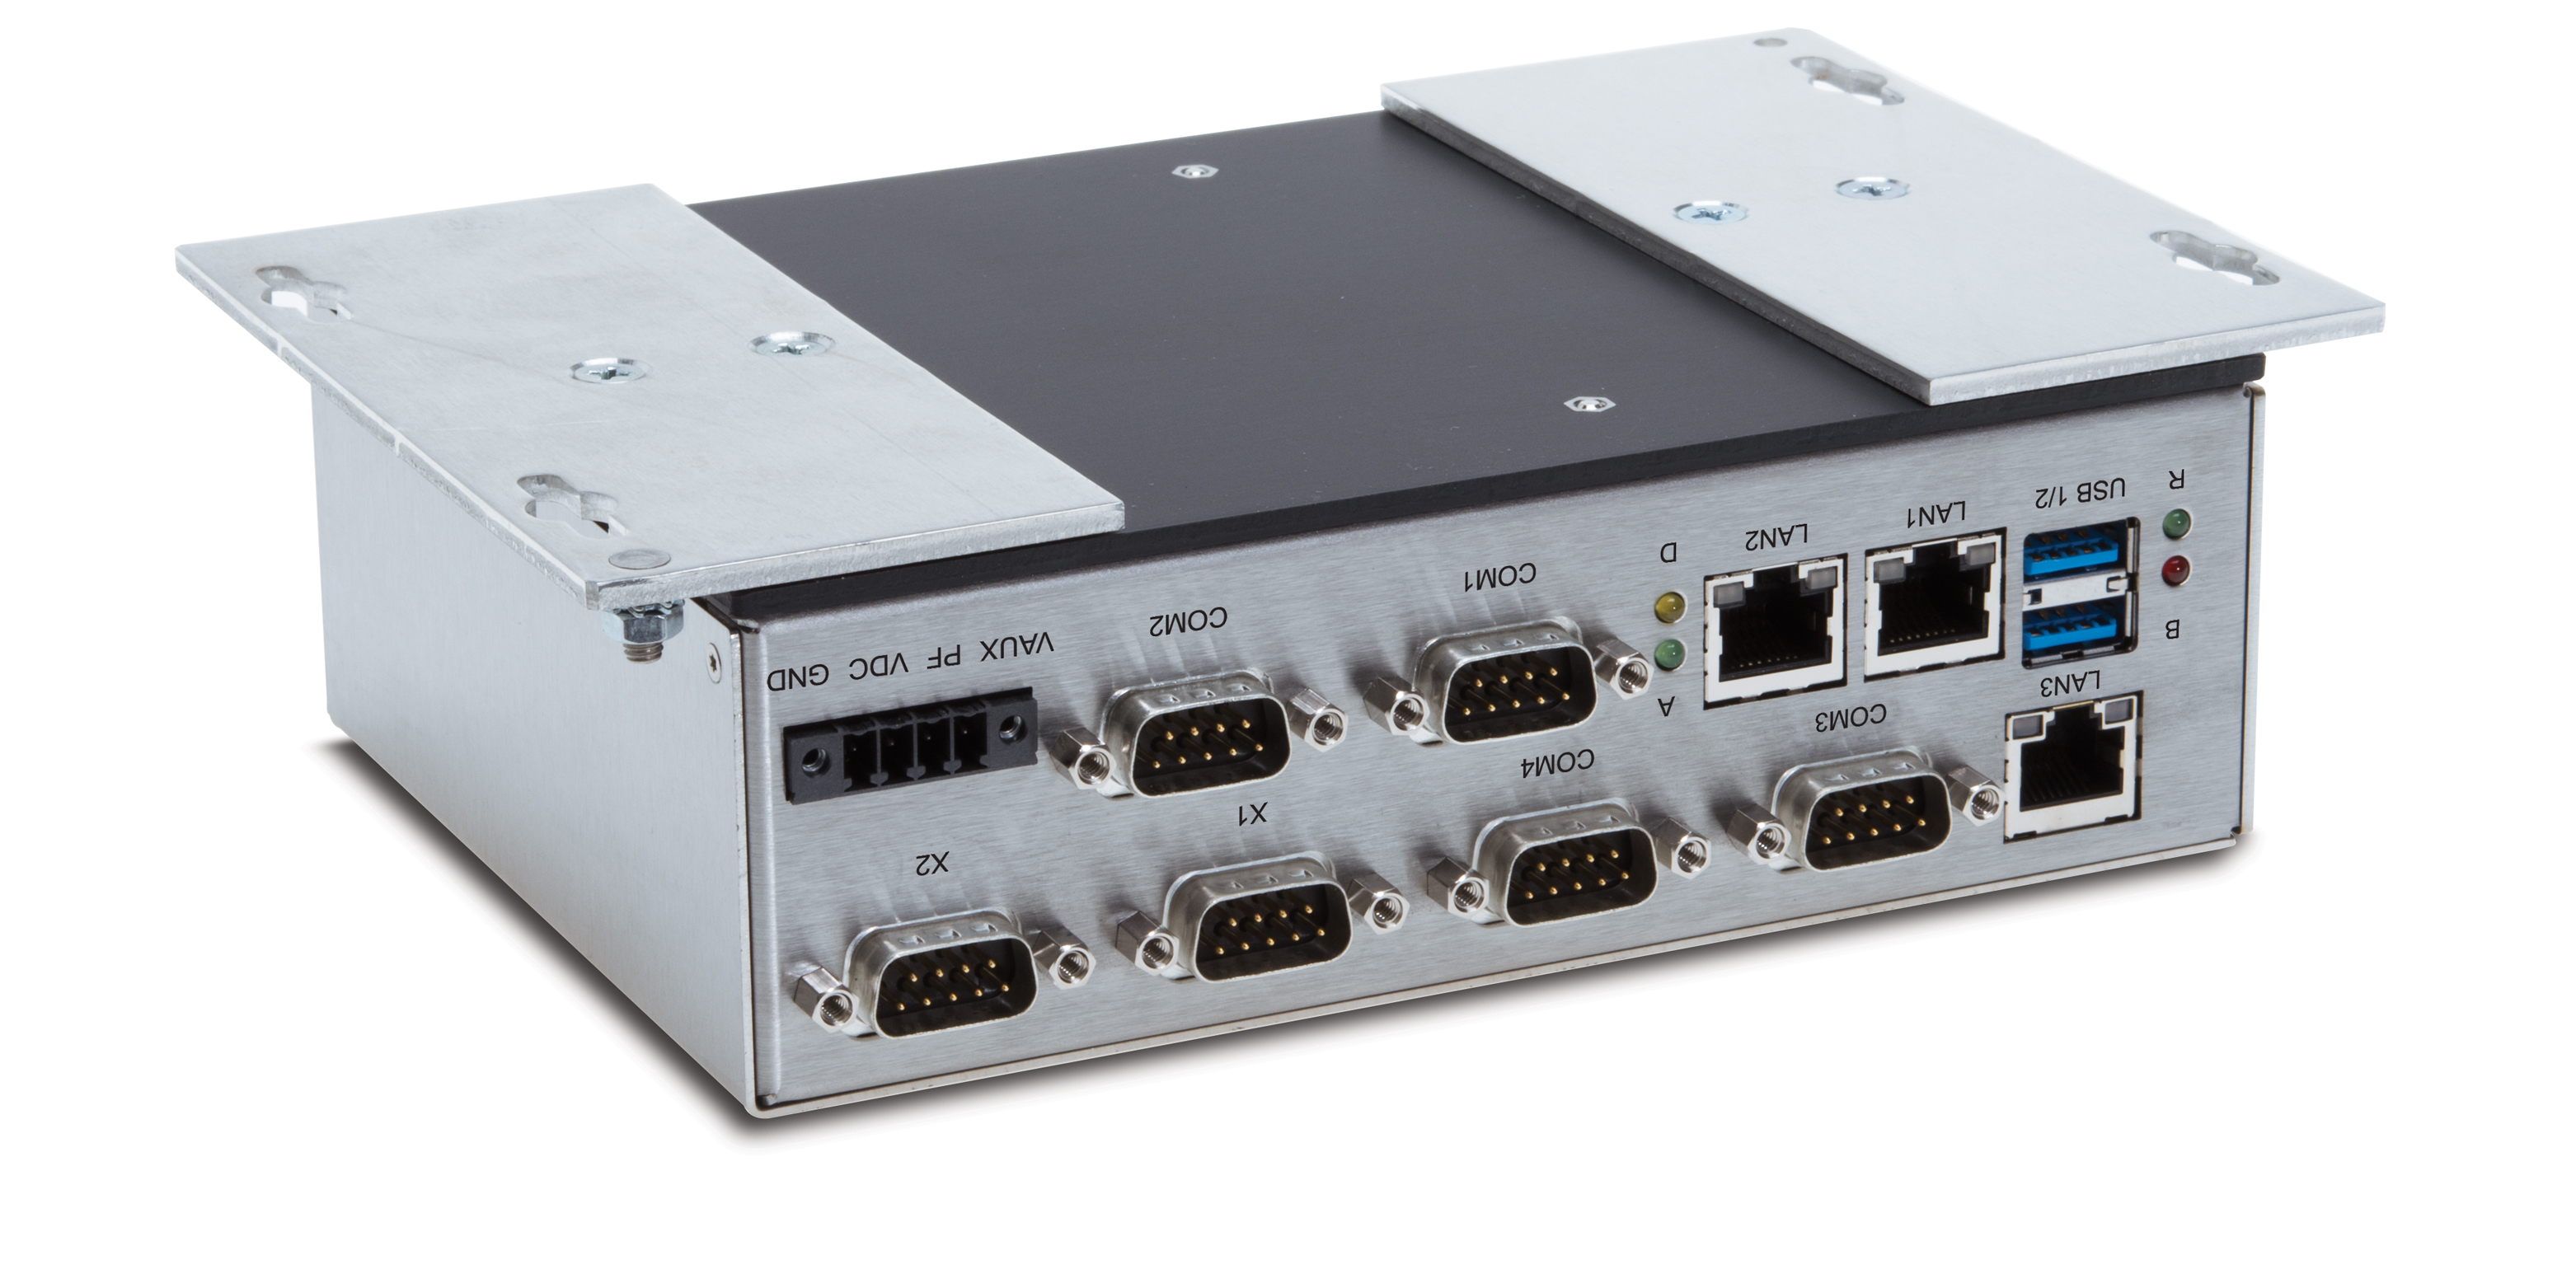 M - Embedded PC COMPACT8 - Syslogic